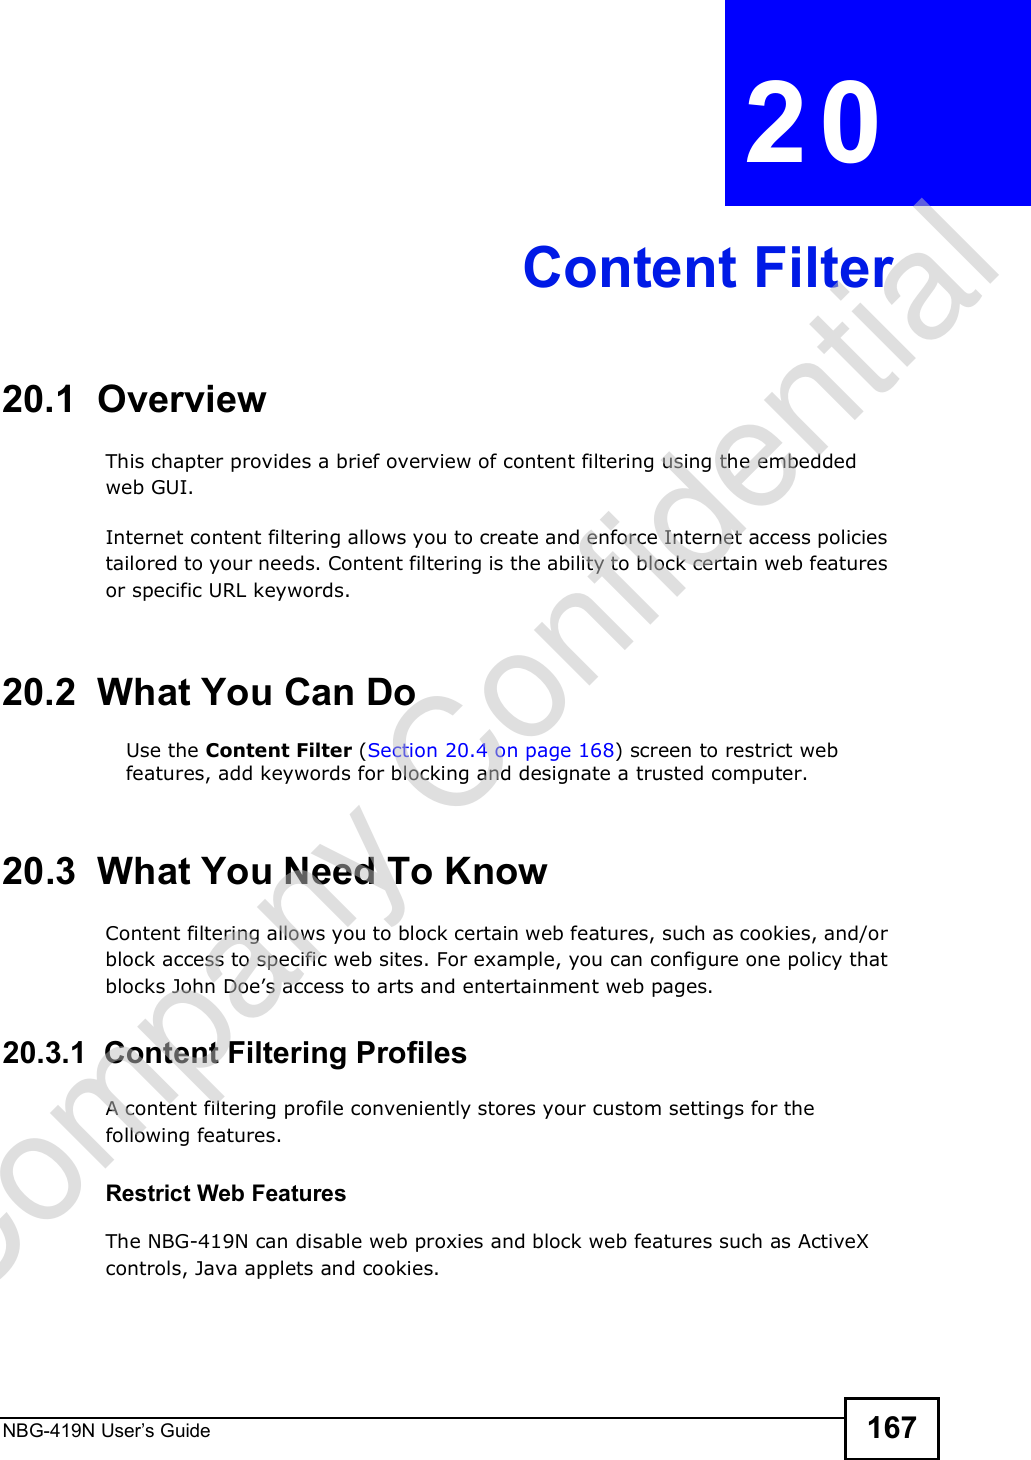 NBG-419N User s Guide 167CHAPTER  20 Content Filter20.1  OverviewThis chapter provides a brief overview of content filtering using the embedded web GUI.Internet content filtering allows you to create and enforce Internet access policies tailored to your needs. Content filtering is the ability to block certain web features or specific URL keywords.20.2  What You Can DoUse the Content Filter (Section 20.4 on page 168) screen to restrict web features, add keywords for blocking and designate a trusted computer.20.3  What You Need To KnowContent filtering allows you to block certain web features, such as cookies, and/or block access to specific web sites. For example, you can configure one policy that blocks John Doe!s access to arts and entertainment web pages.20.3.1  Content Filtering ProfilesA content filtering profile conveniently stores your custom settings for the following features.Restrict Web FeaturesThe NBG-419N can disable web proxies and block web features such as ActiveX controls, Java applets and cookies.Company Confidential